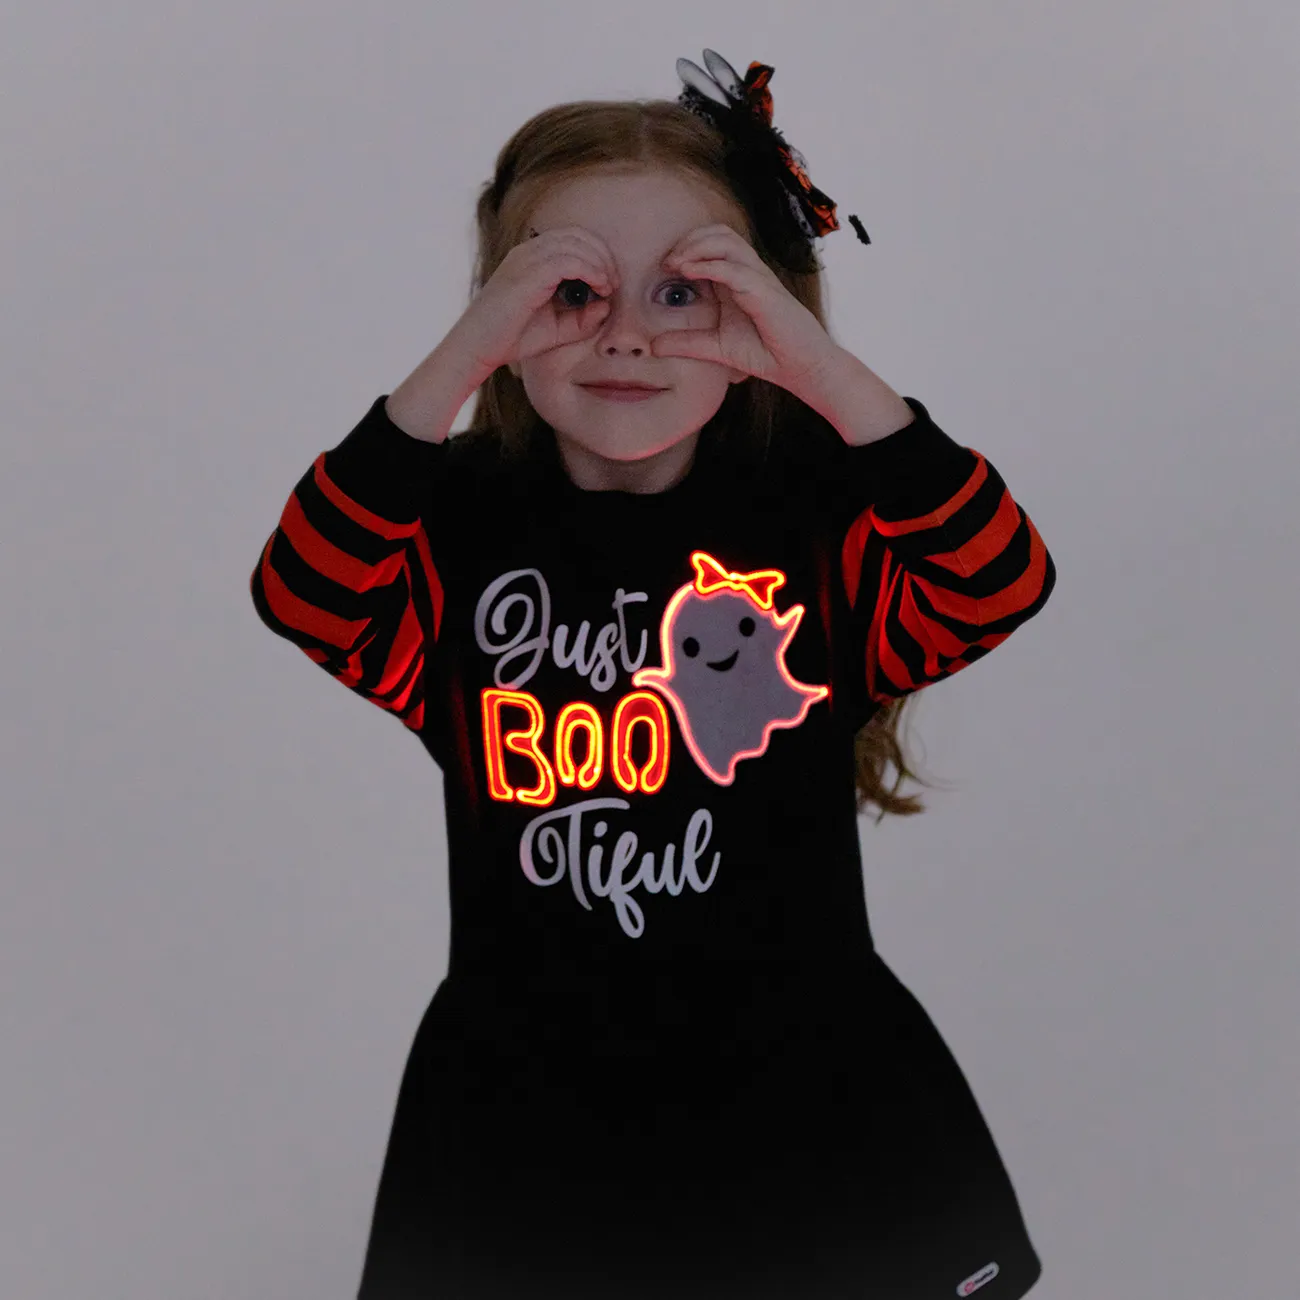 Go-Glow Illuminating Sweatshirt Dress with Light Up Print and Letters Including Controller (Built-In Battery) Black big image 1